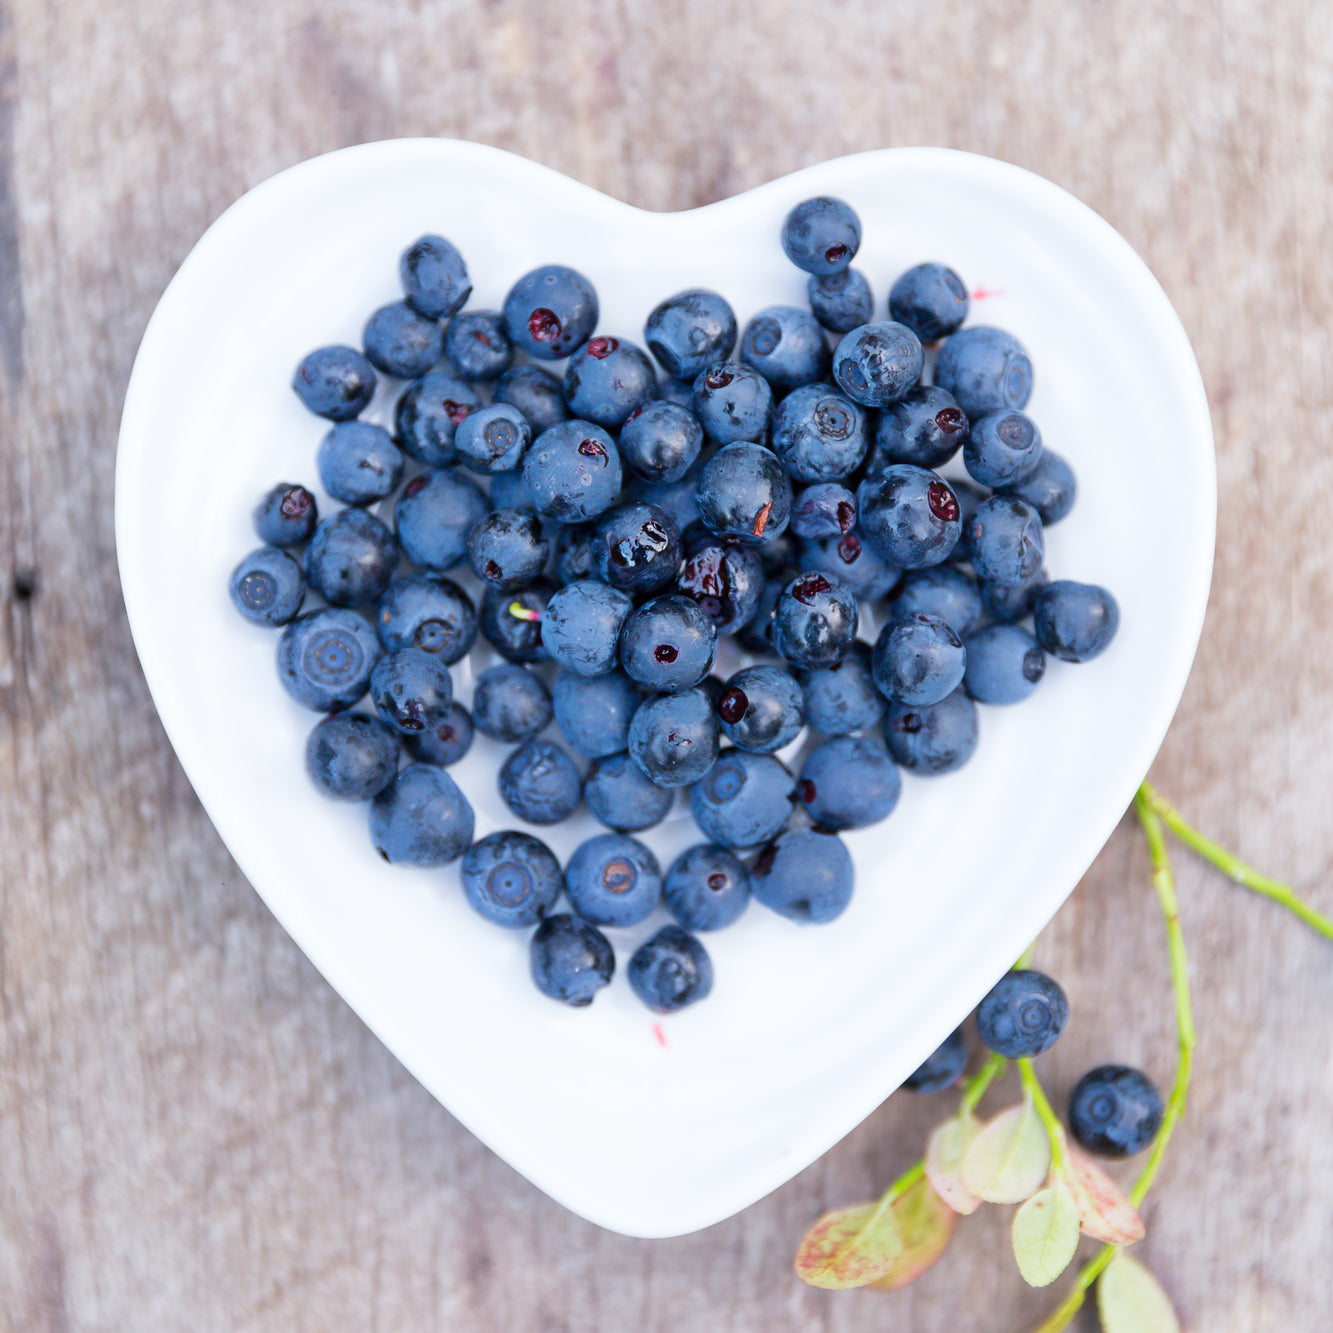 Berry Good for Them: The Wholesome Benefits of Feeding Blueberries to Dogs and Cats